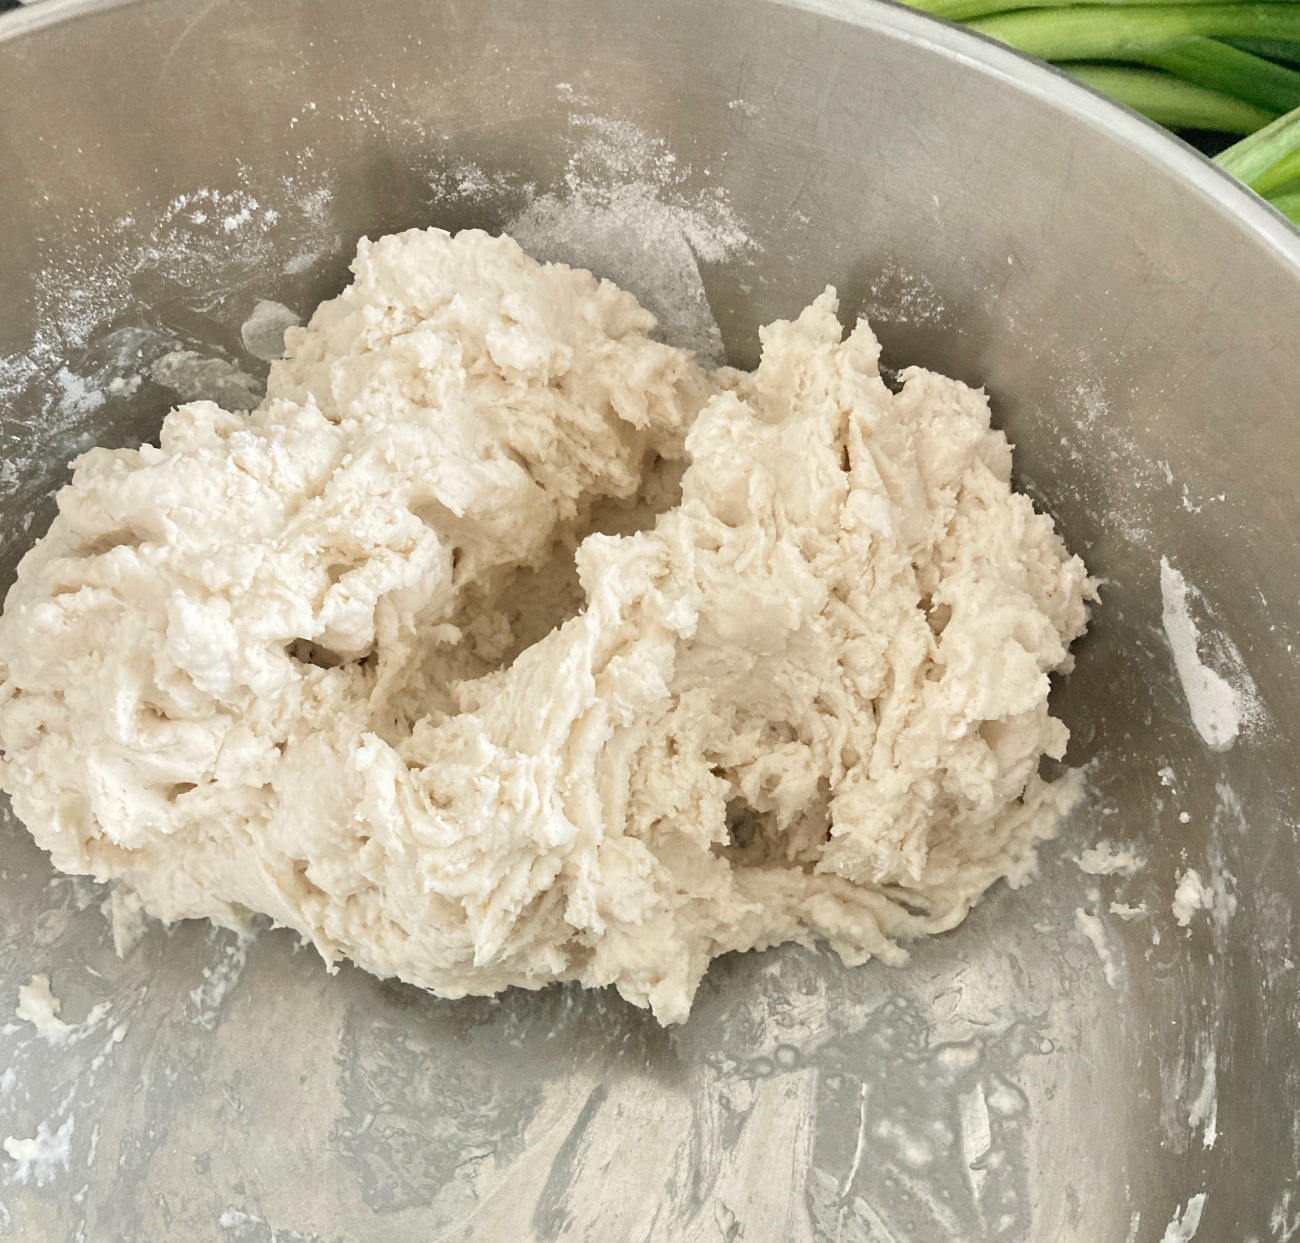 Combine flour and salt for dough in large mixing bowl. Using an electric mixer with dough hooks add hot water slowly while mixing. Then add cold water slowly. If dough is too dry add 1 teaspoon cool water and knead again. Repeat until ball forms, then chill in refrigerator for 20 minutes.